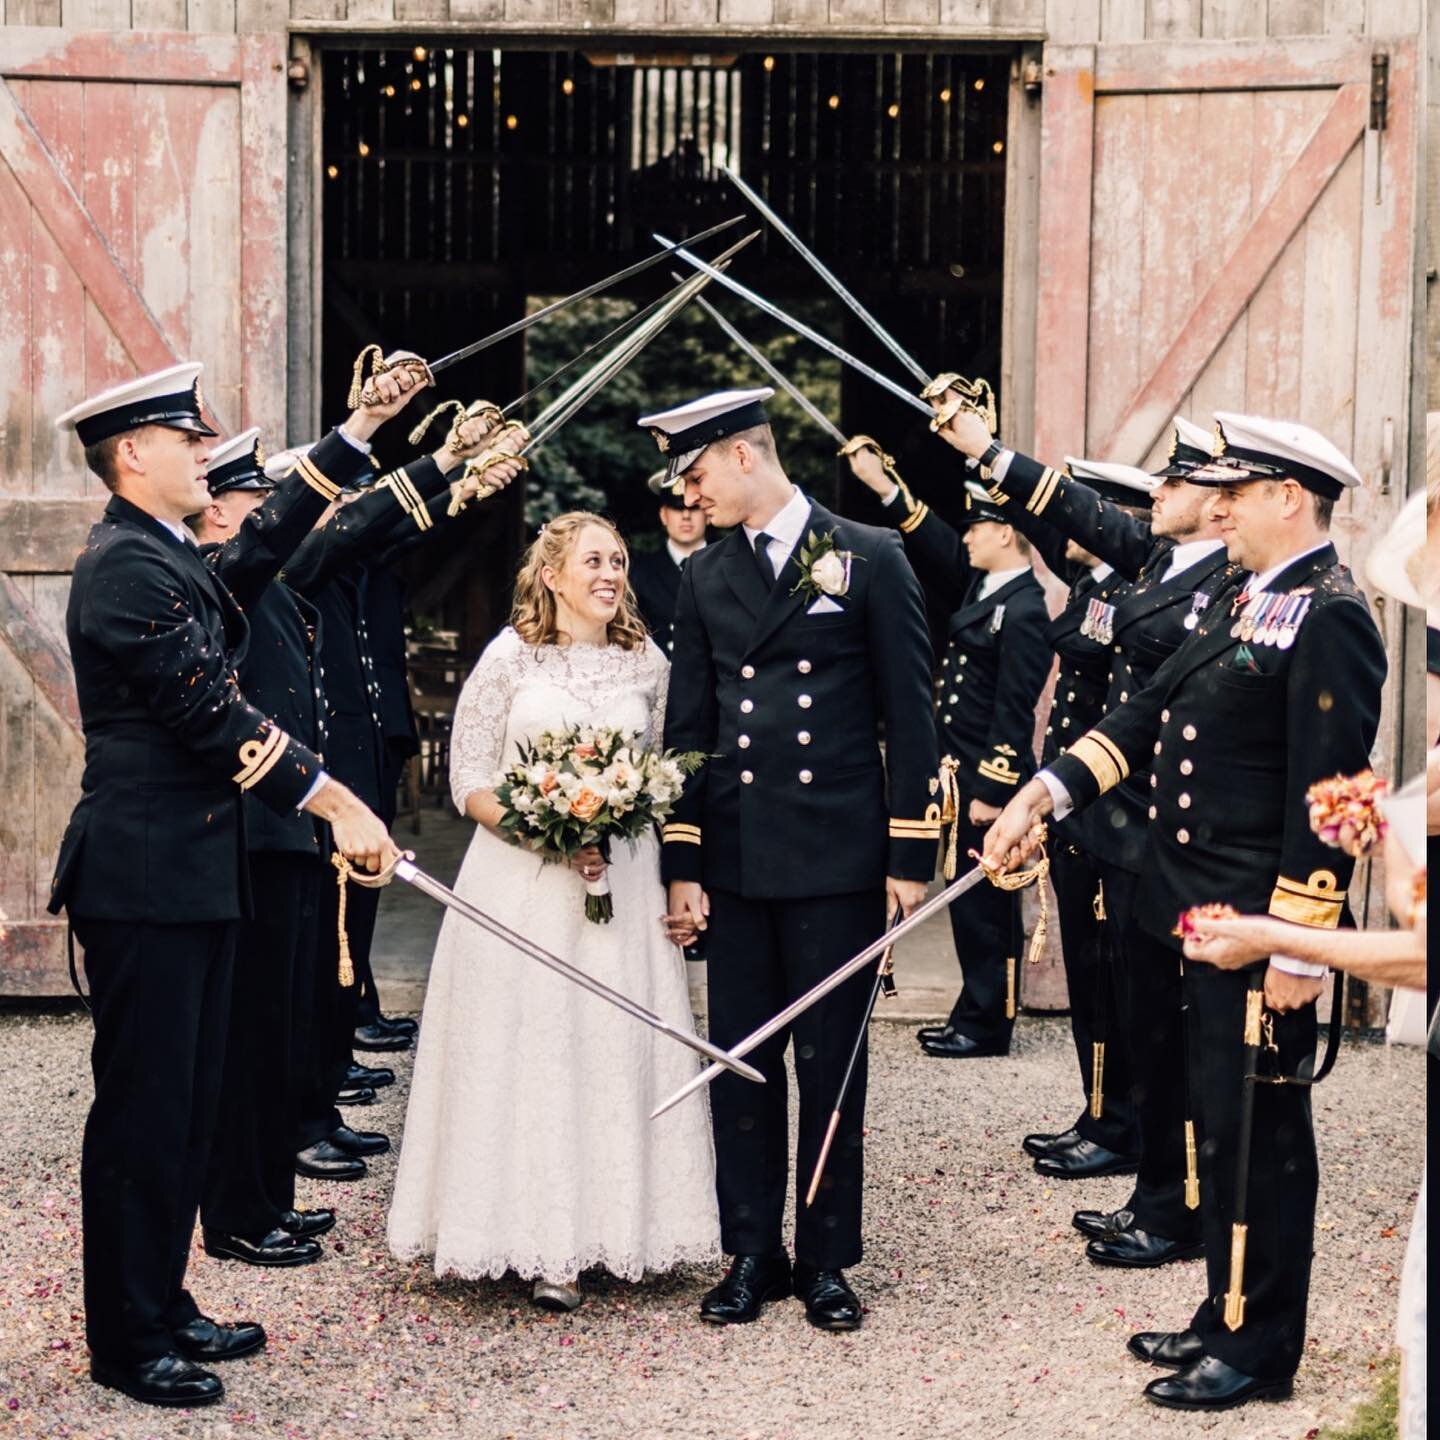 Who doesn&rsquo;t love a Nancarrow Farm wedding. So delighted I finally got to shoot a wedding here. Even more so, as it was my first military wedding. Two firsts and we had an absolute blast. Congratulations D &amp; A 

#nancarrowfarmwedding #milita